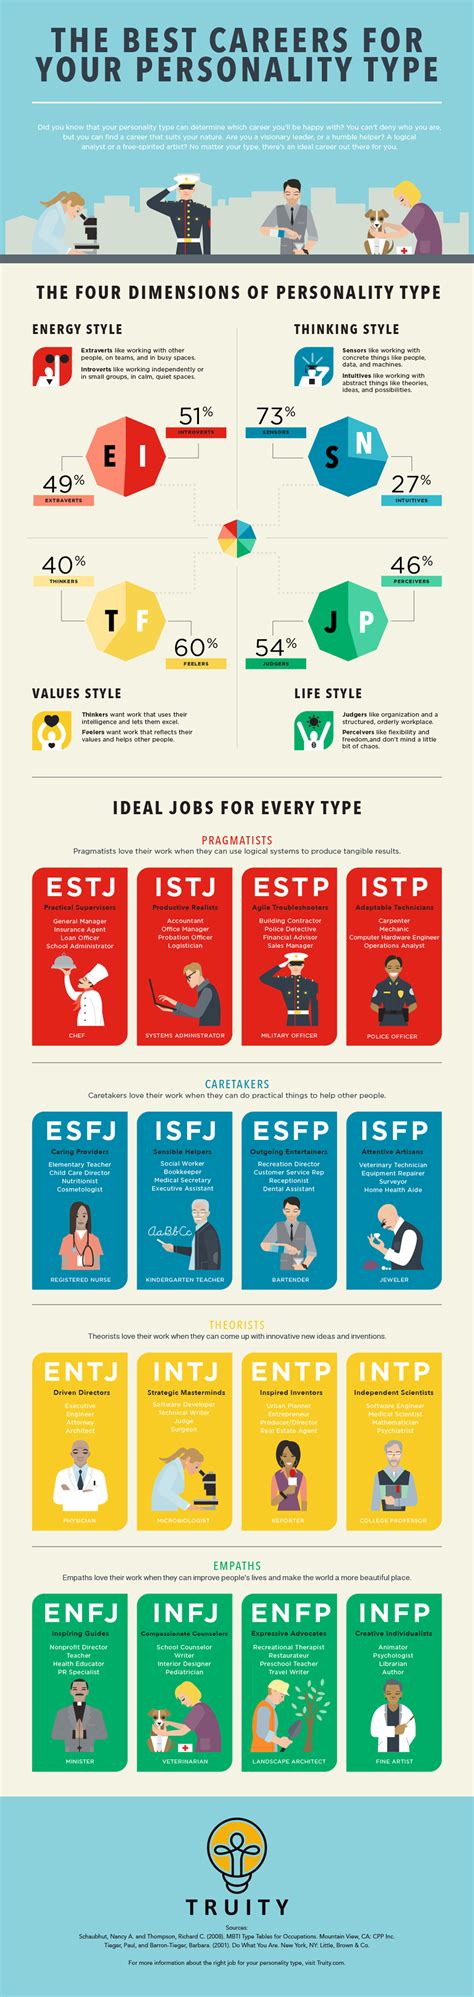 The Best Career for Your Personality Type | Truity